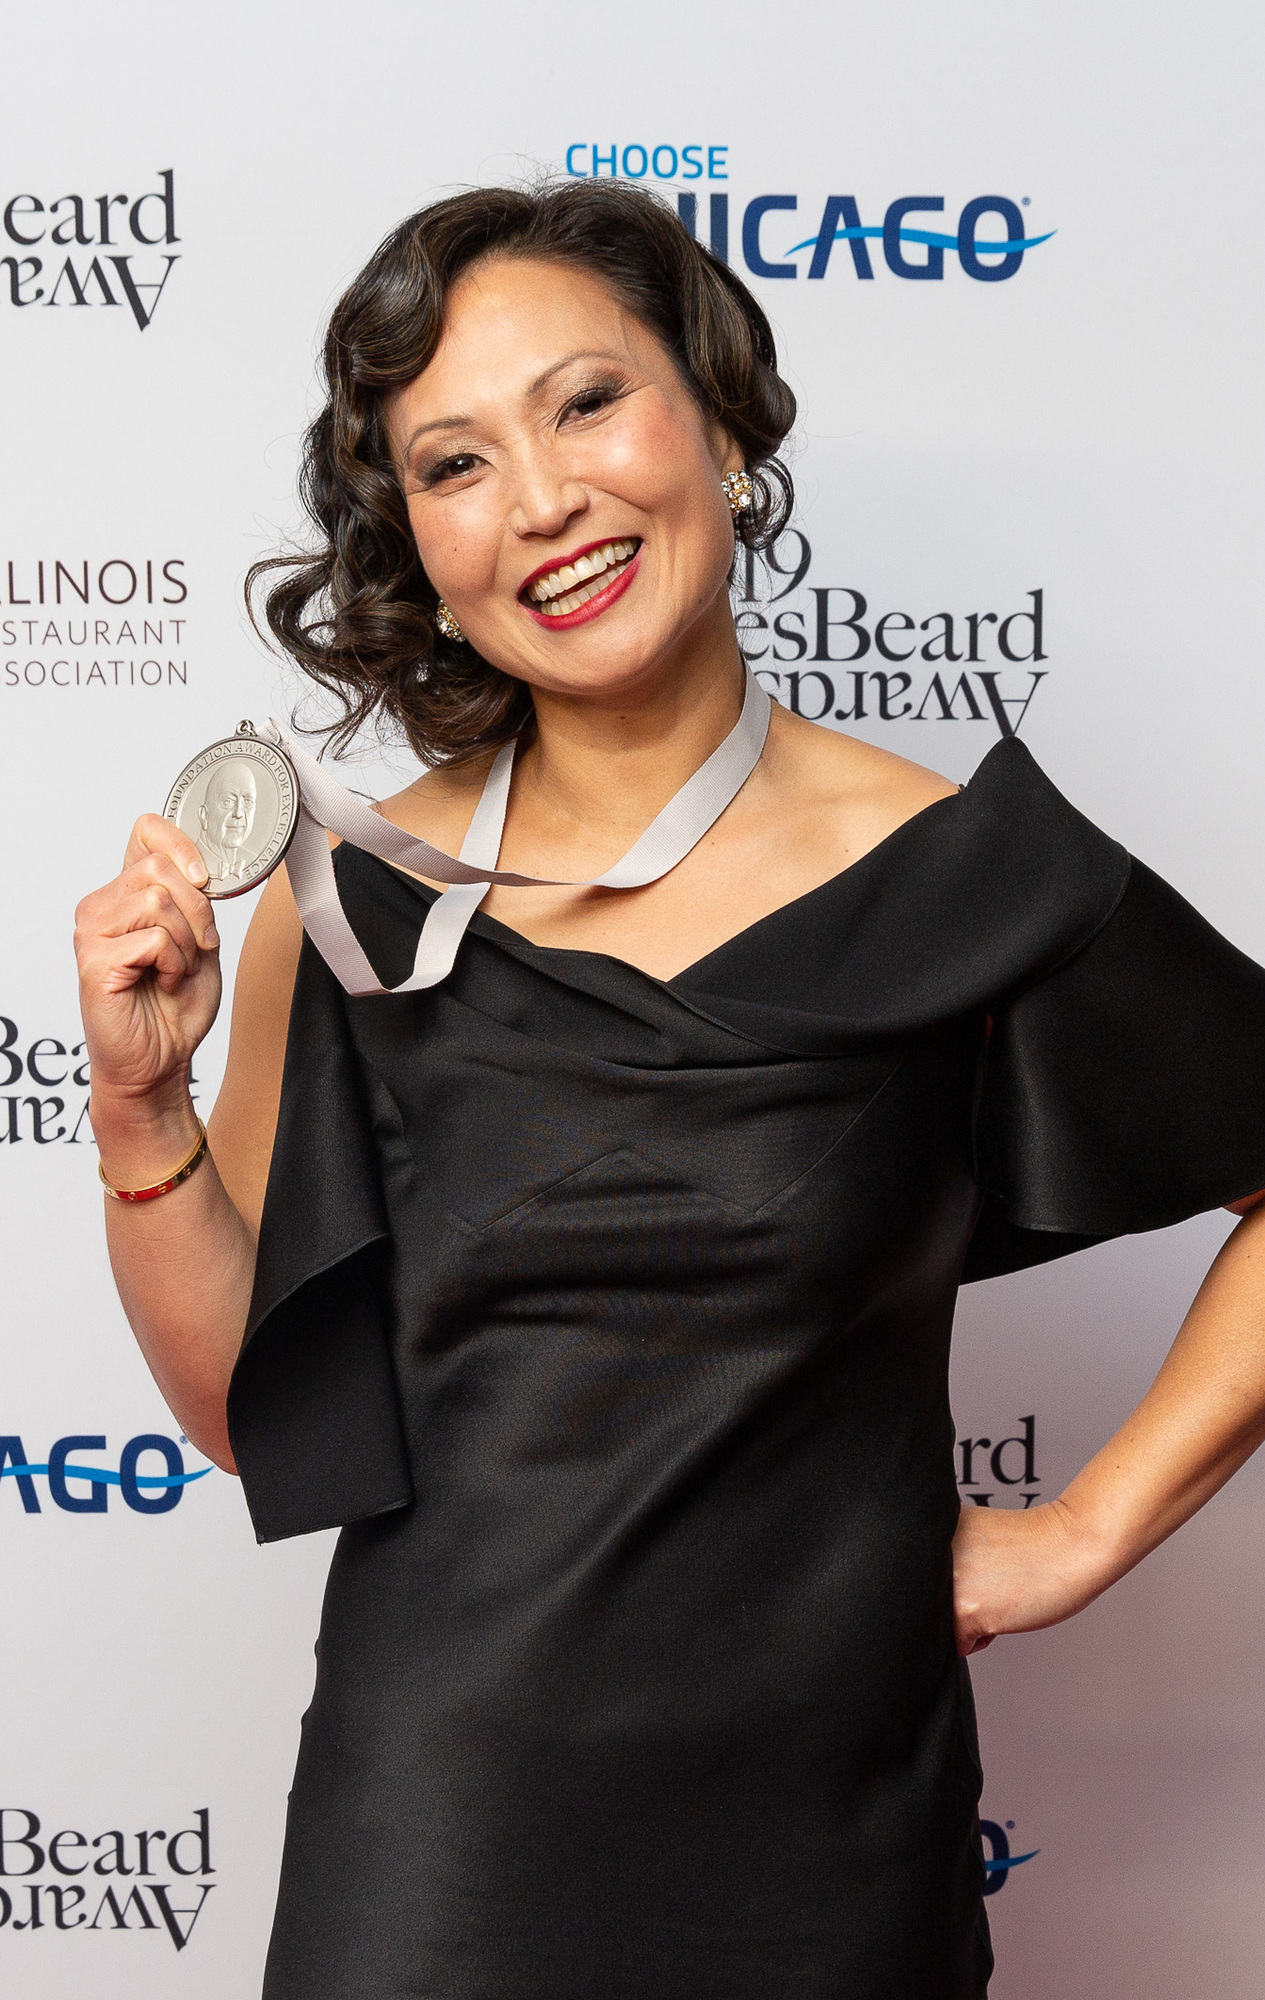 Ann Kim solidified her place as one of the country’s best chefs with her 2019 James Beard award for Best Chef Midwest. Her parents weren’t impressed at the time, asking “Who’s James Beard” before reminding her to stay humble.